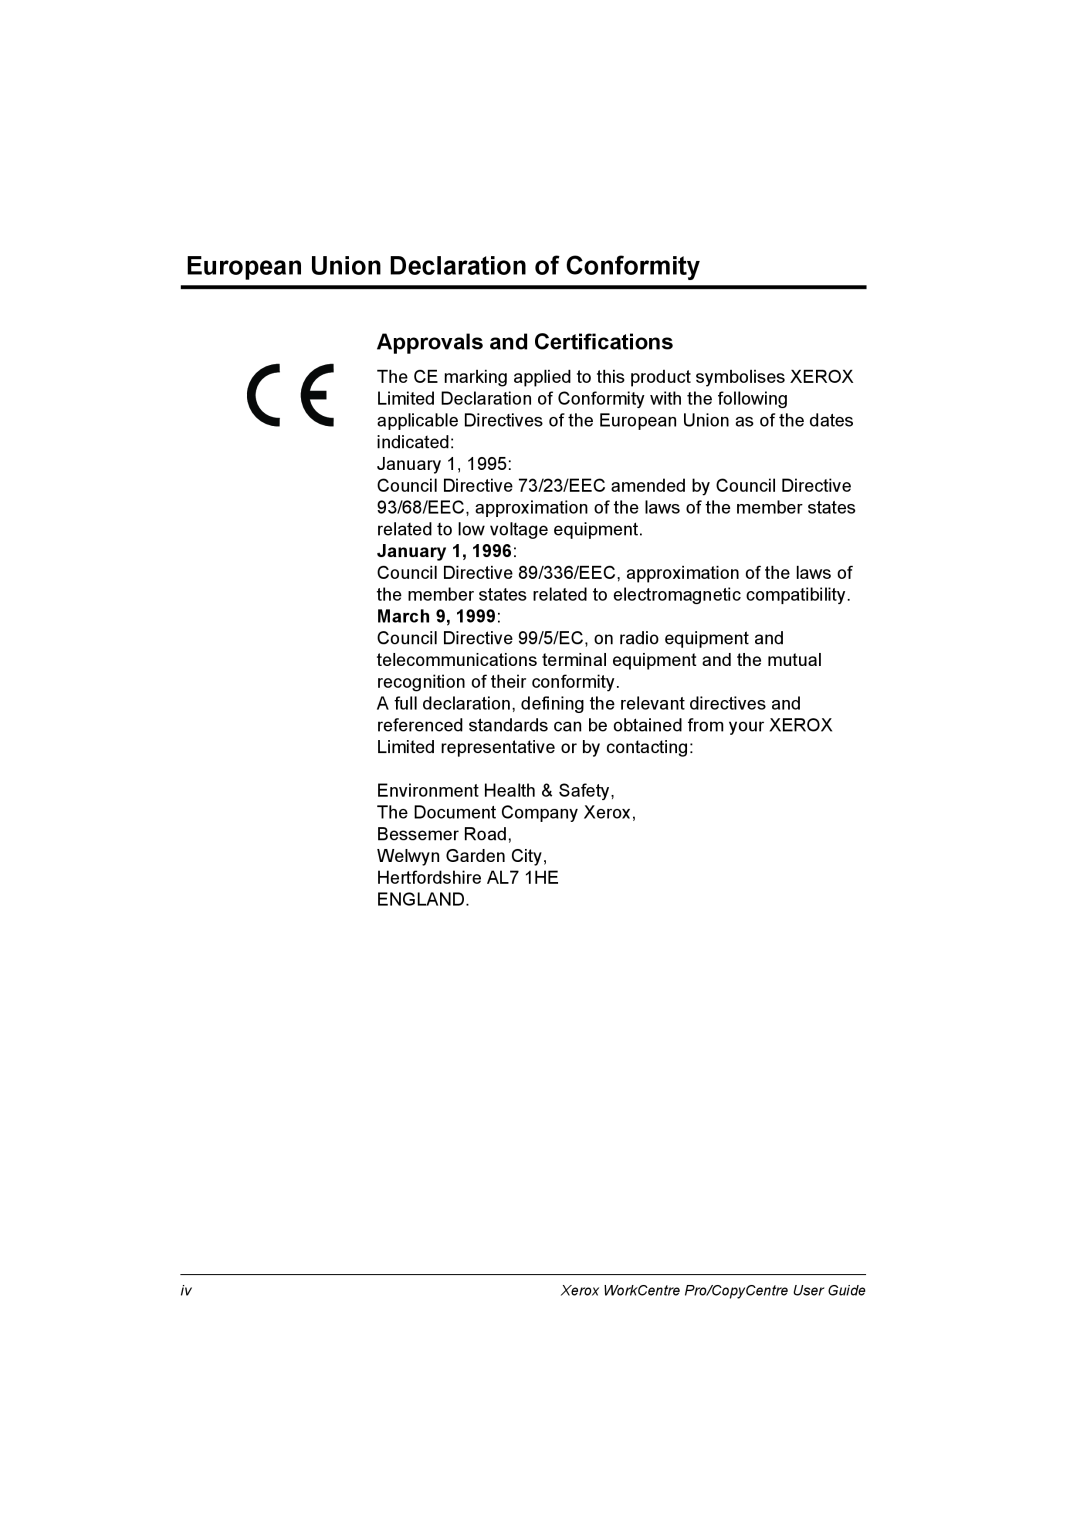 Xerox C65, C90, C75, WorkCentre Pro 75 manual European Union Declaration of Conformity, Approvals and Certifications 